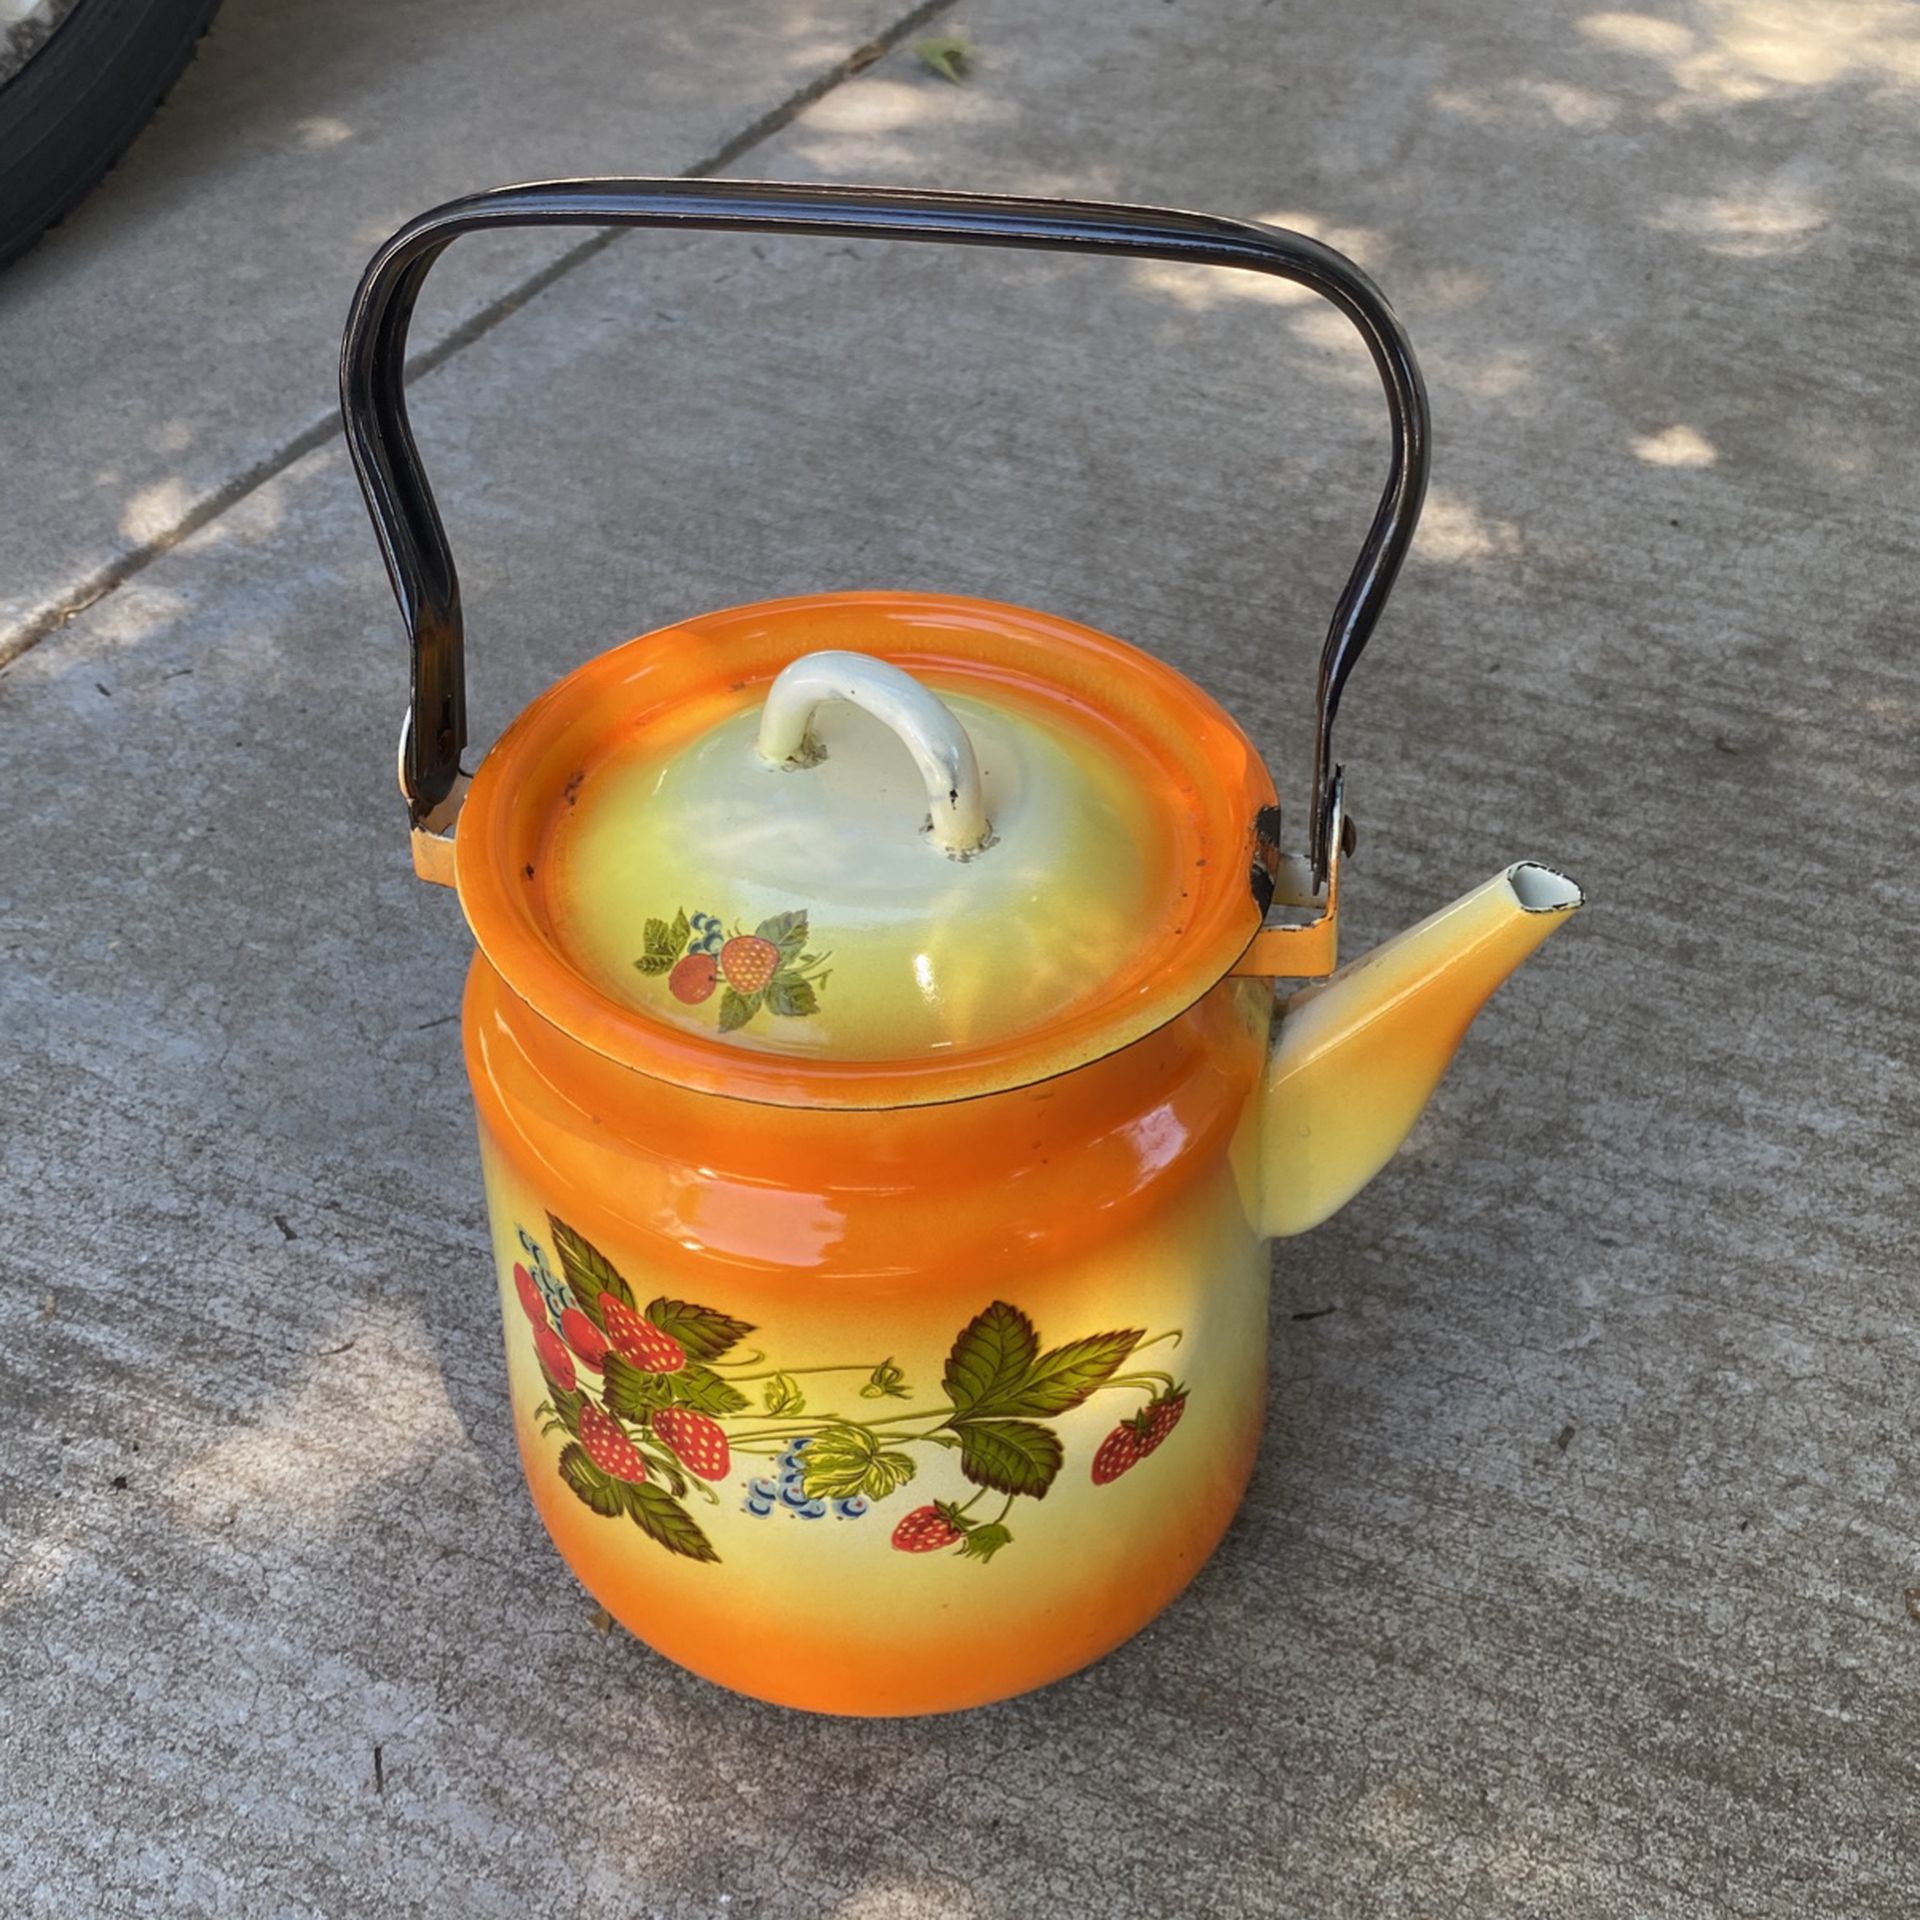 Antique Strawberry Themed Tea Kettle